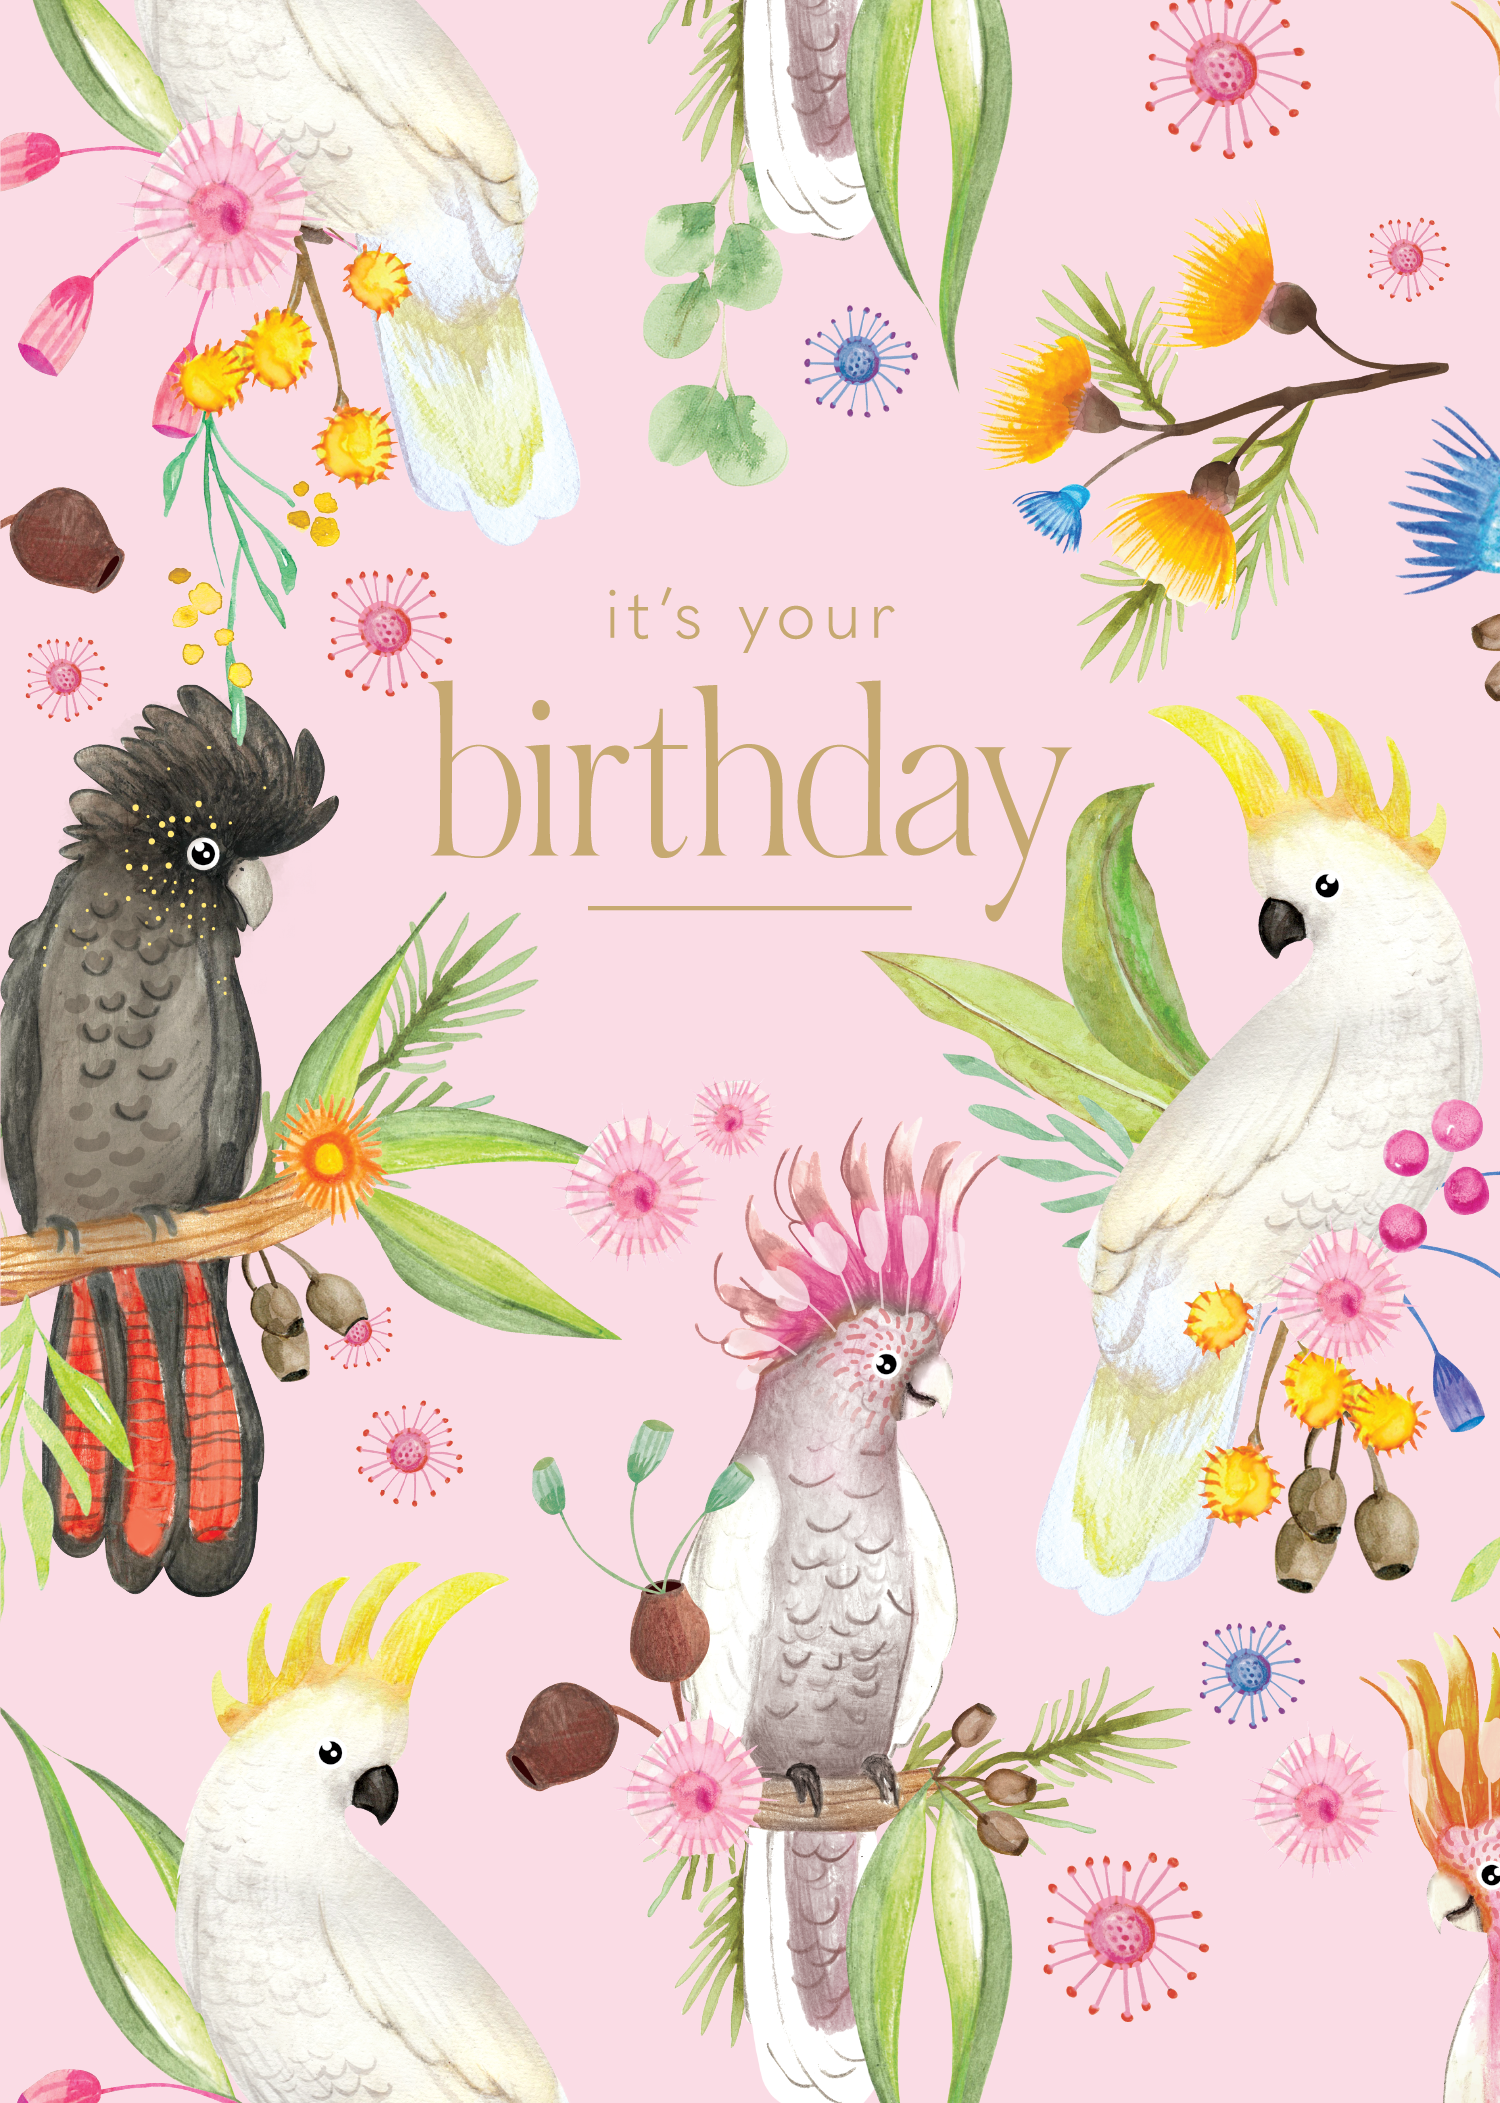 Greeting Card Gumtree Friends - Its Your Birthday